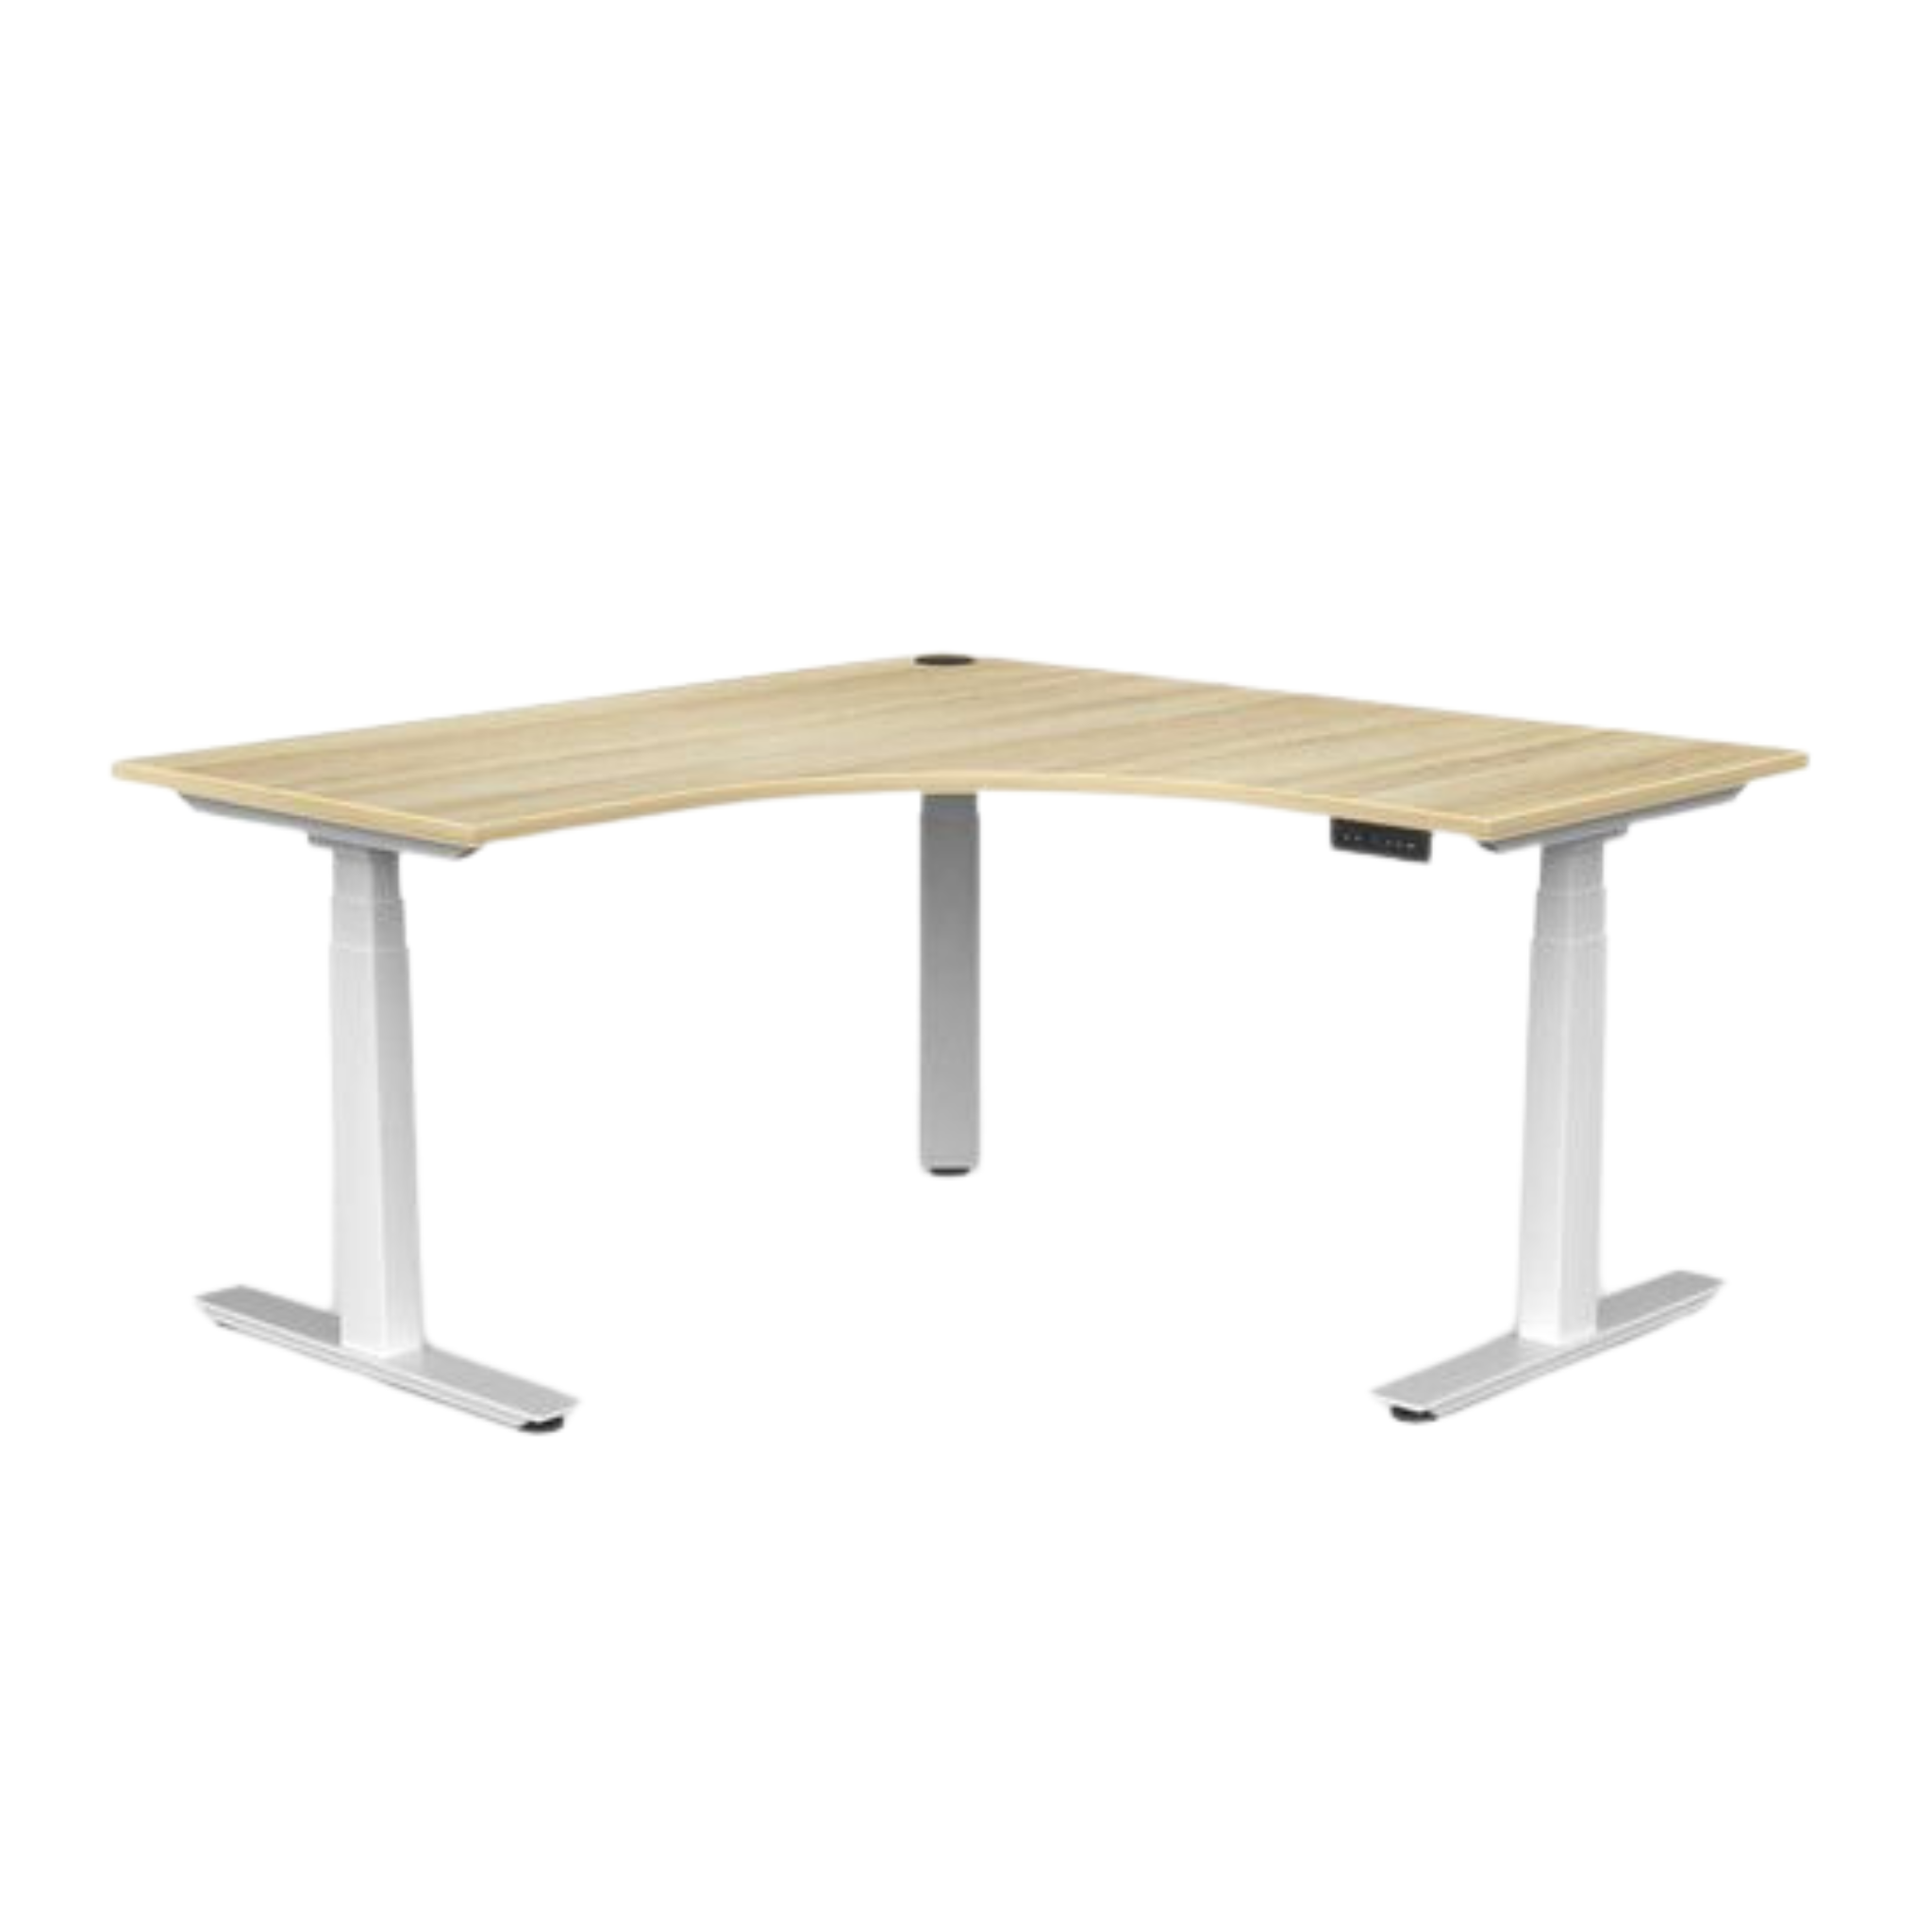 Agile 3 electric sit to stand corner workstation with white frame and atlantic oak top